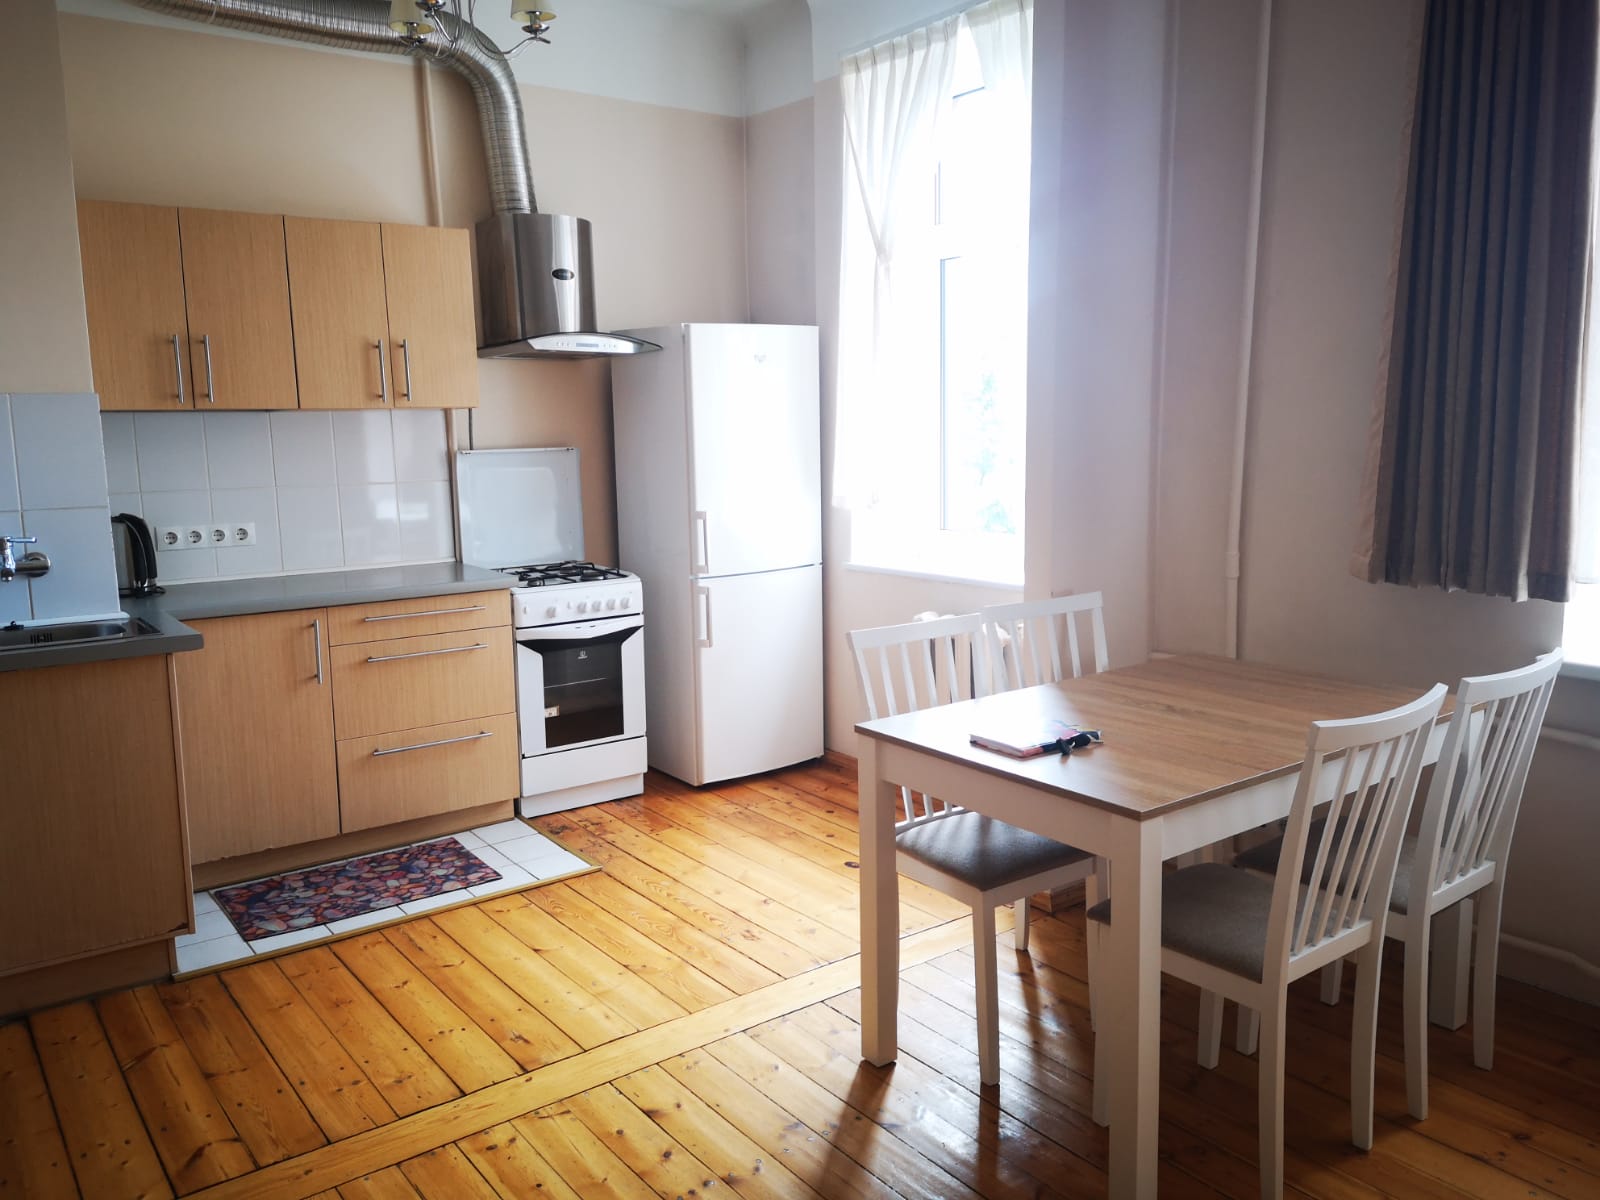 Apartment for rent, Tallinas street 14 - Image 1